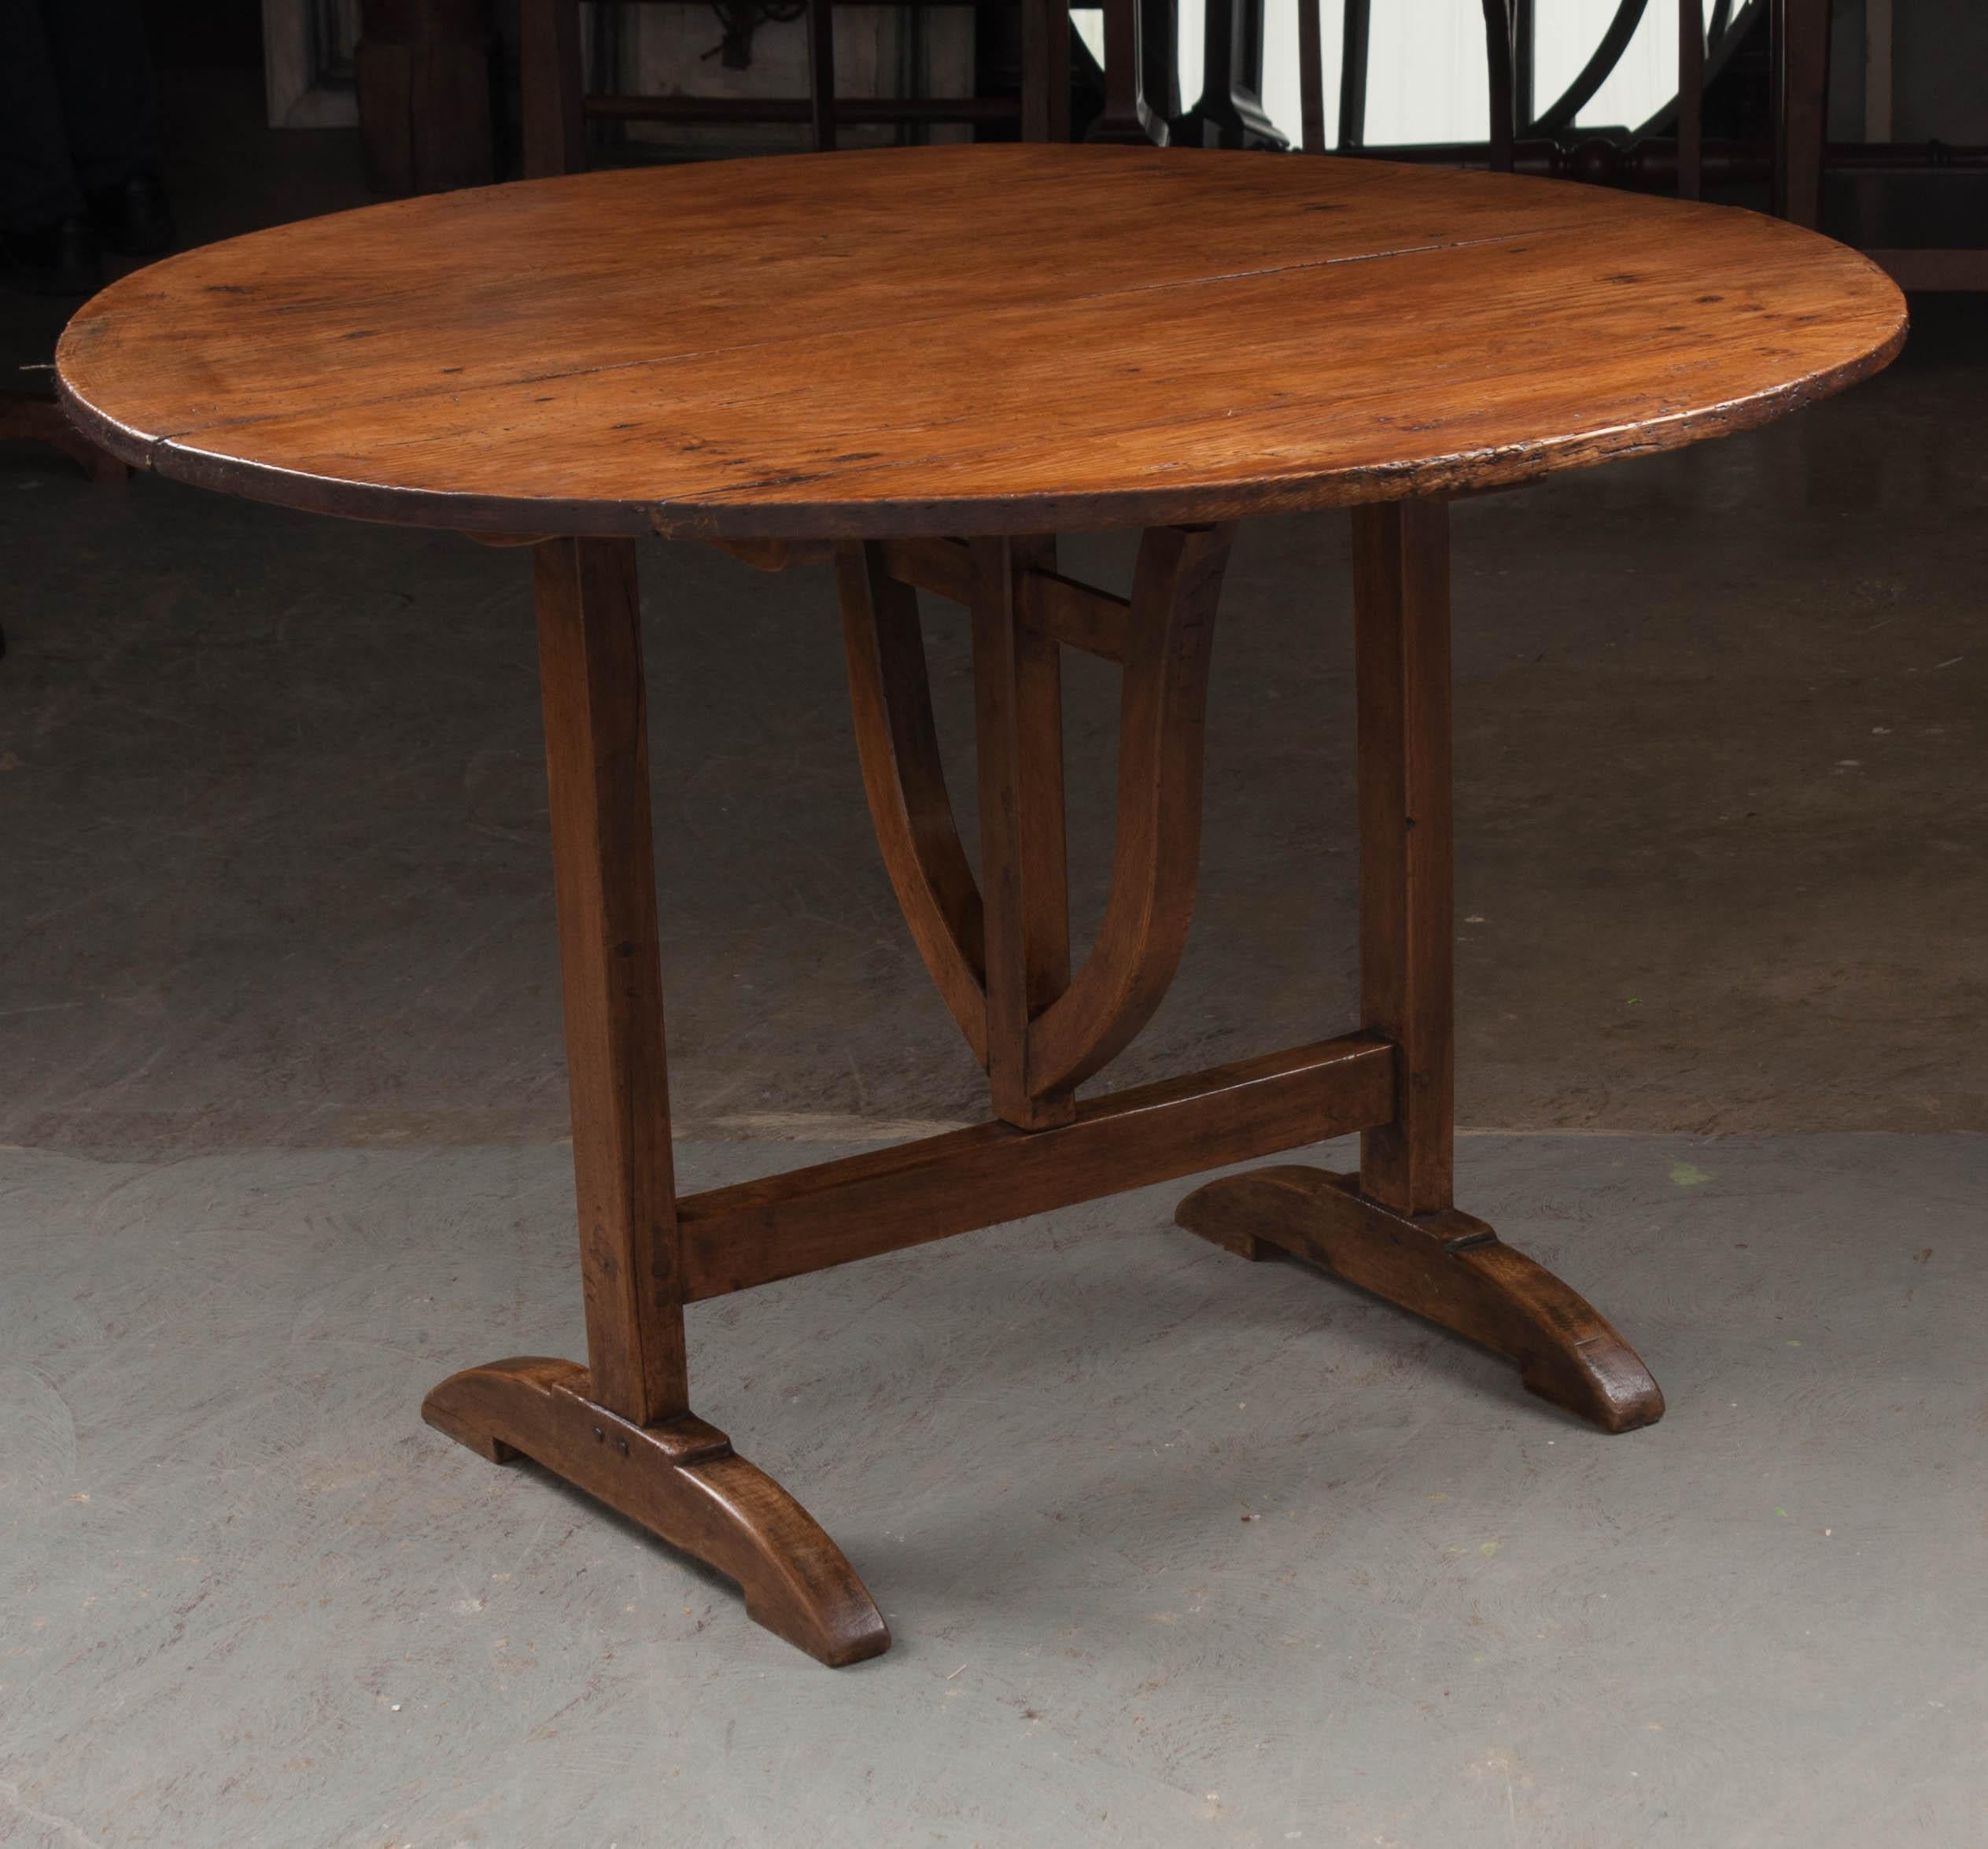 A very special pine and walnut vendange table, also known as a wine taster’s table, made in France, circa 1870. The table has a round top, made of pine, while the styled base is made of walnut. This table would have been brought out for tasting wine